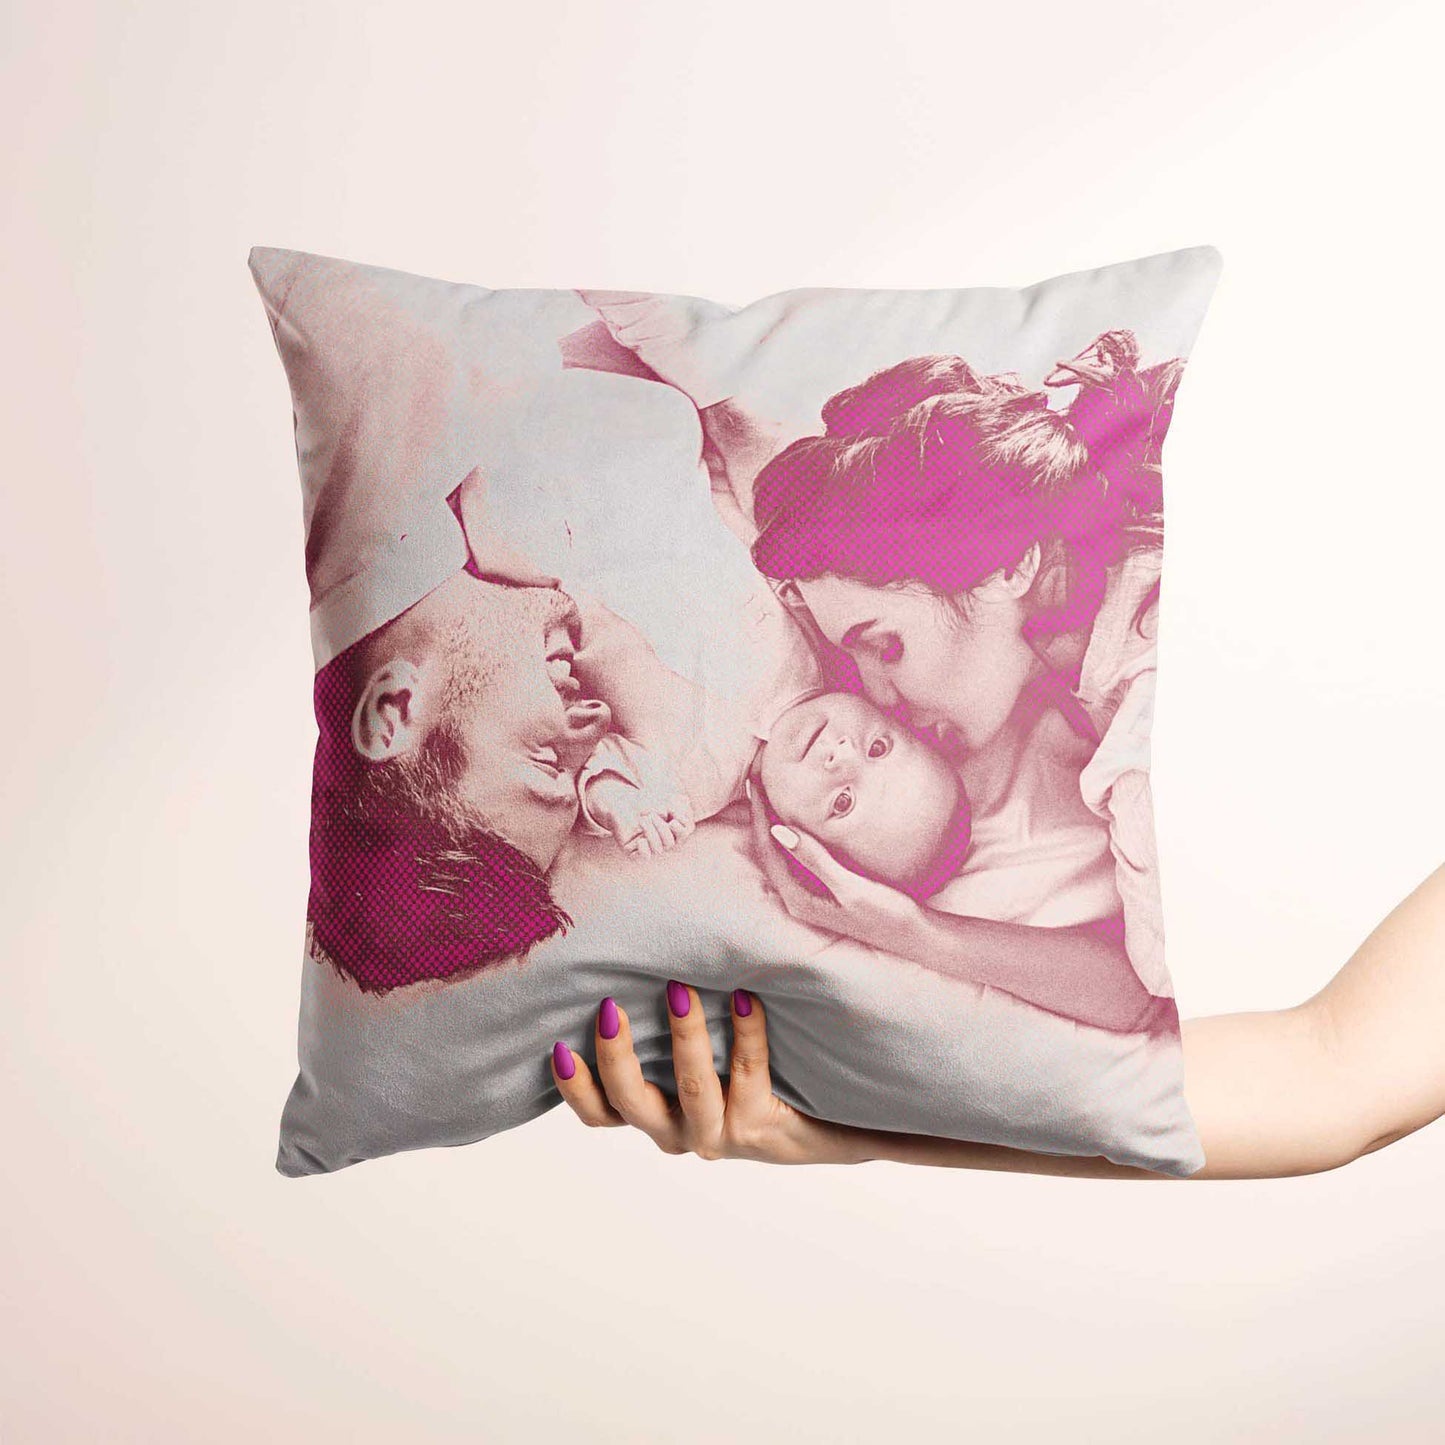 Discover the perfect fusion of creativity and comfort with the Personalised Pink Pop Art Cushion. Crafted with attention to detail, this cushion features a captivating digital artwork in a halftone texture, handmade